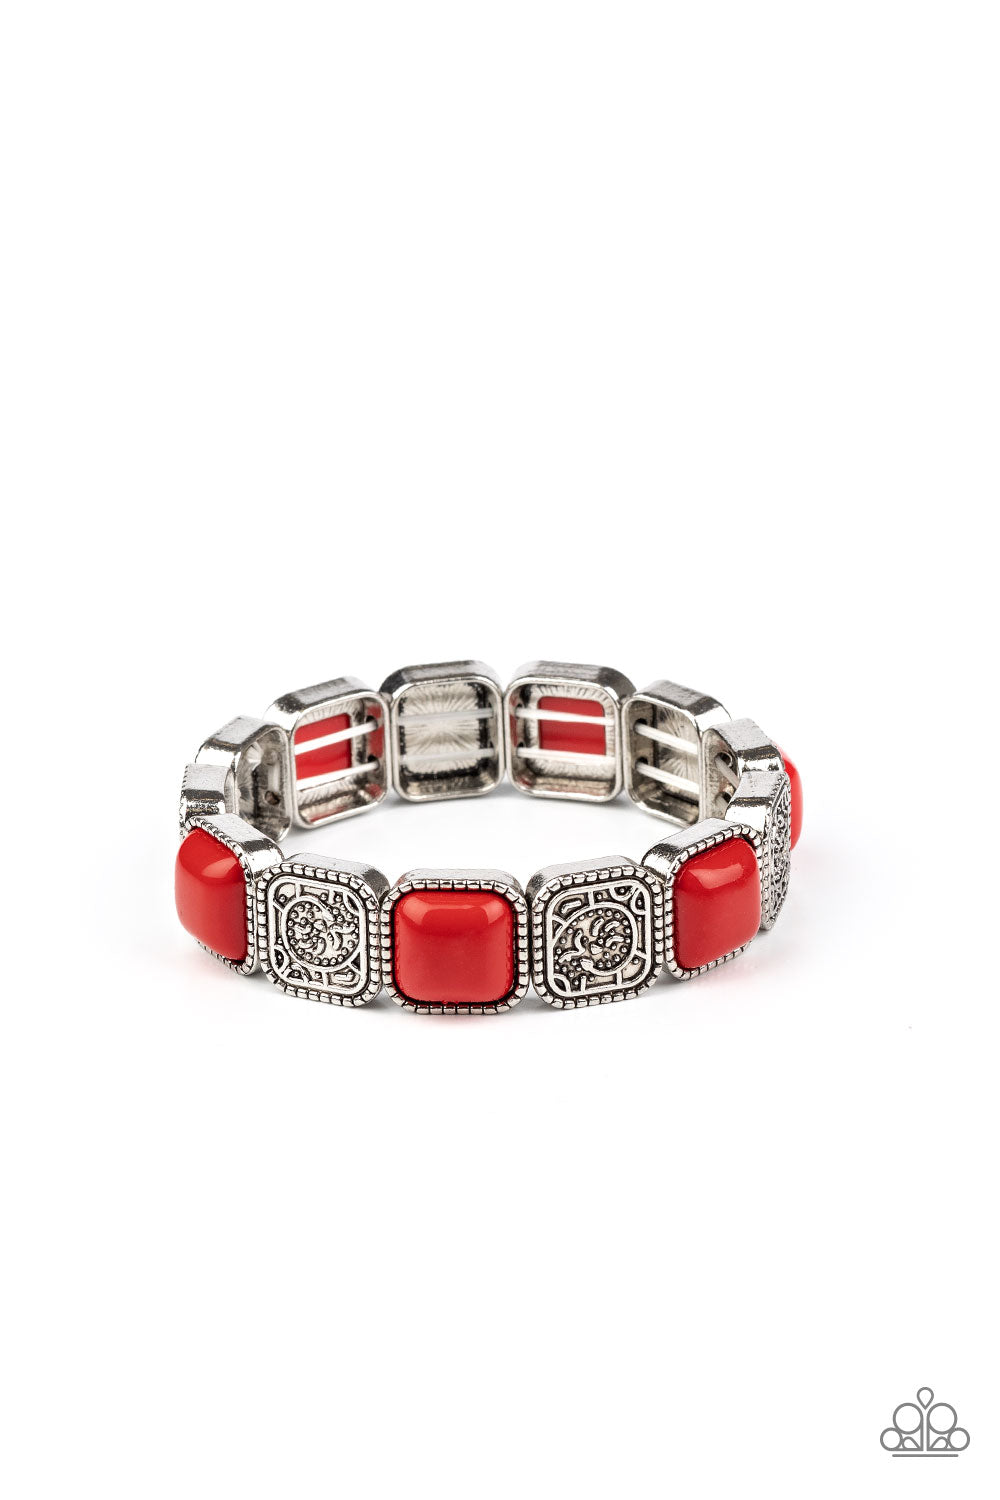 &lt;P&gt; Studded in abstract textures, antiqued silver frames join square red beaded frames along a stretchy band around the wrist for a colorfully vintage look. &lt;/P&gt;

&lt;P&gt;&lt;I&gt; Sold as one individual bracelet.&lt;/I&gt;&lt;/p&gt;


&lt;img src=\&quot;https://d9b54x484lq62.cloudfront.net/paparazzi/shopping/images/517_tag150x115_1.png\&quot; alt=\&quot;New Kit\&quot; align=\&quot;middle\&quot; height=\&quot;50\&quot; width=\&quot;50\&quot;/&gt;